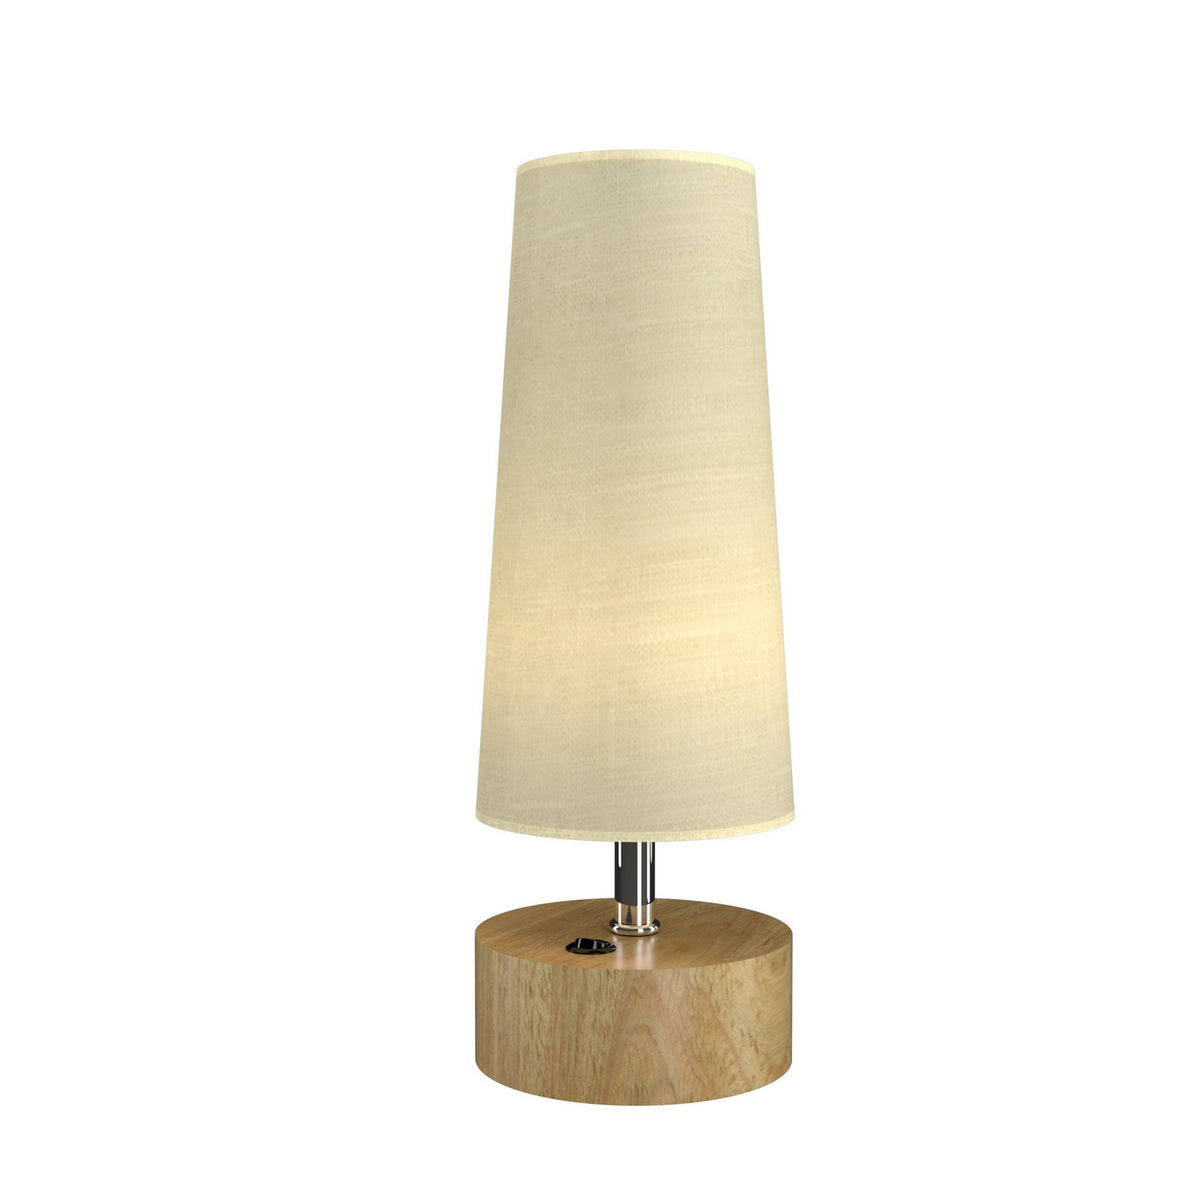 Accord Lighting - 7101.09 - LED Table Lamp - Clean - Louro Freijo